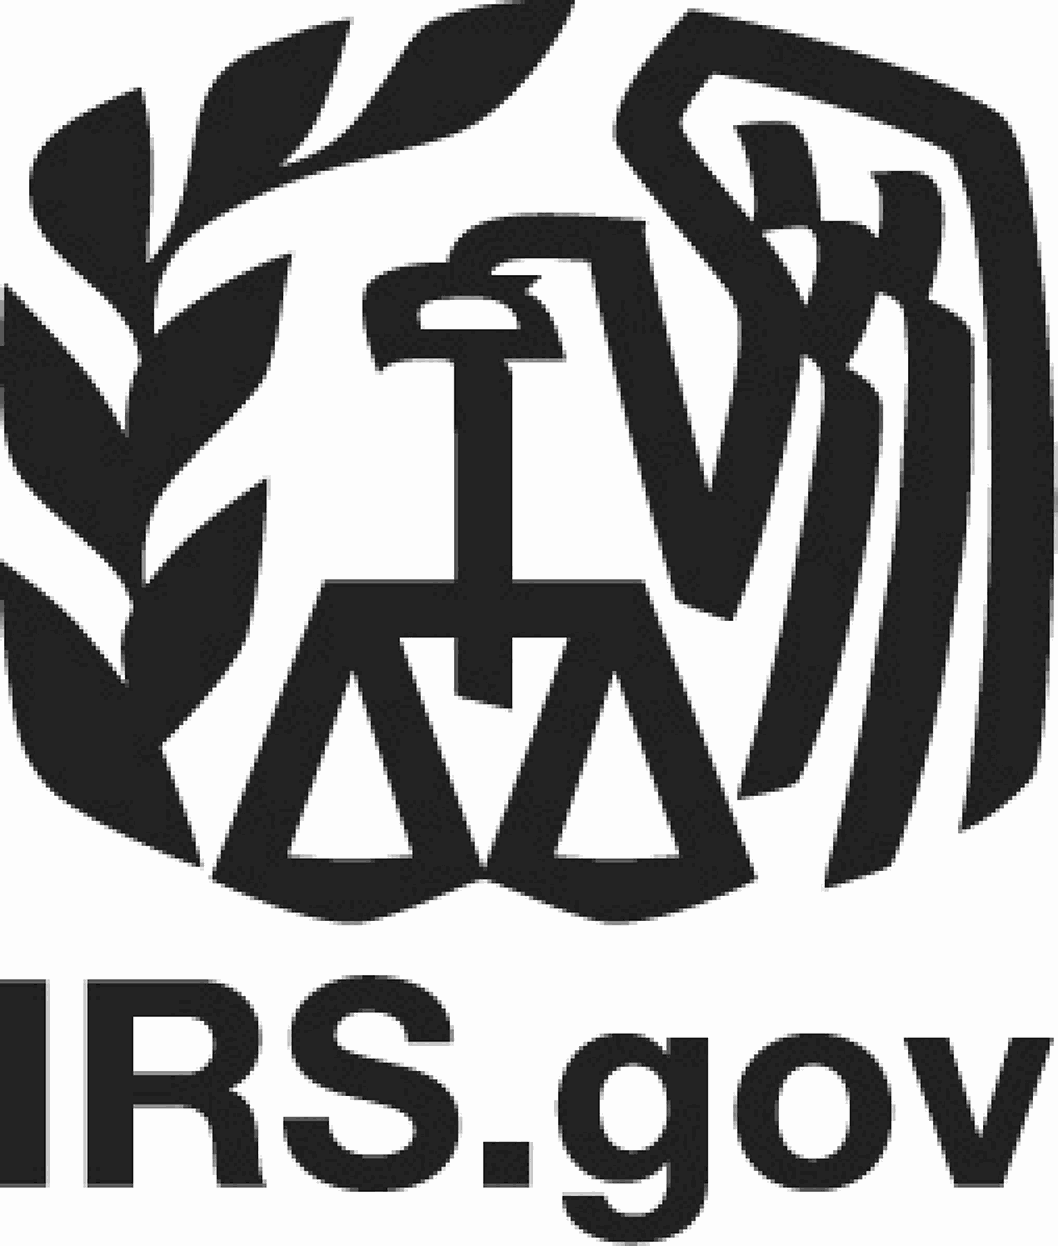 IRS Logo - 1.17.7 Use of the Official IRS Seal, IRS Logo, Program Logos and ...